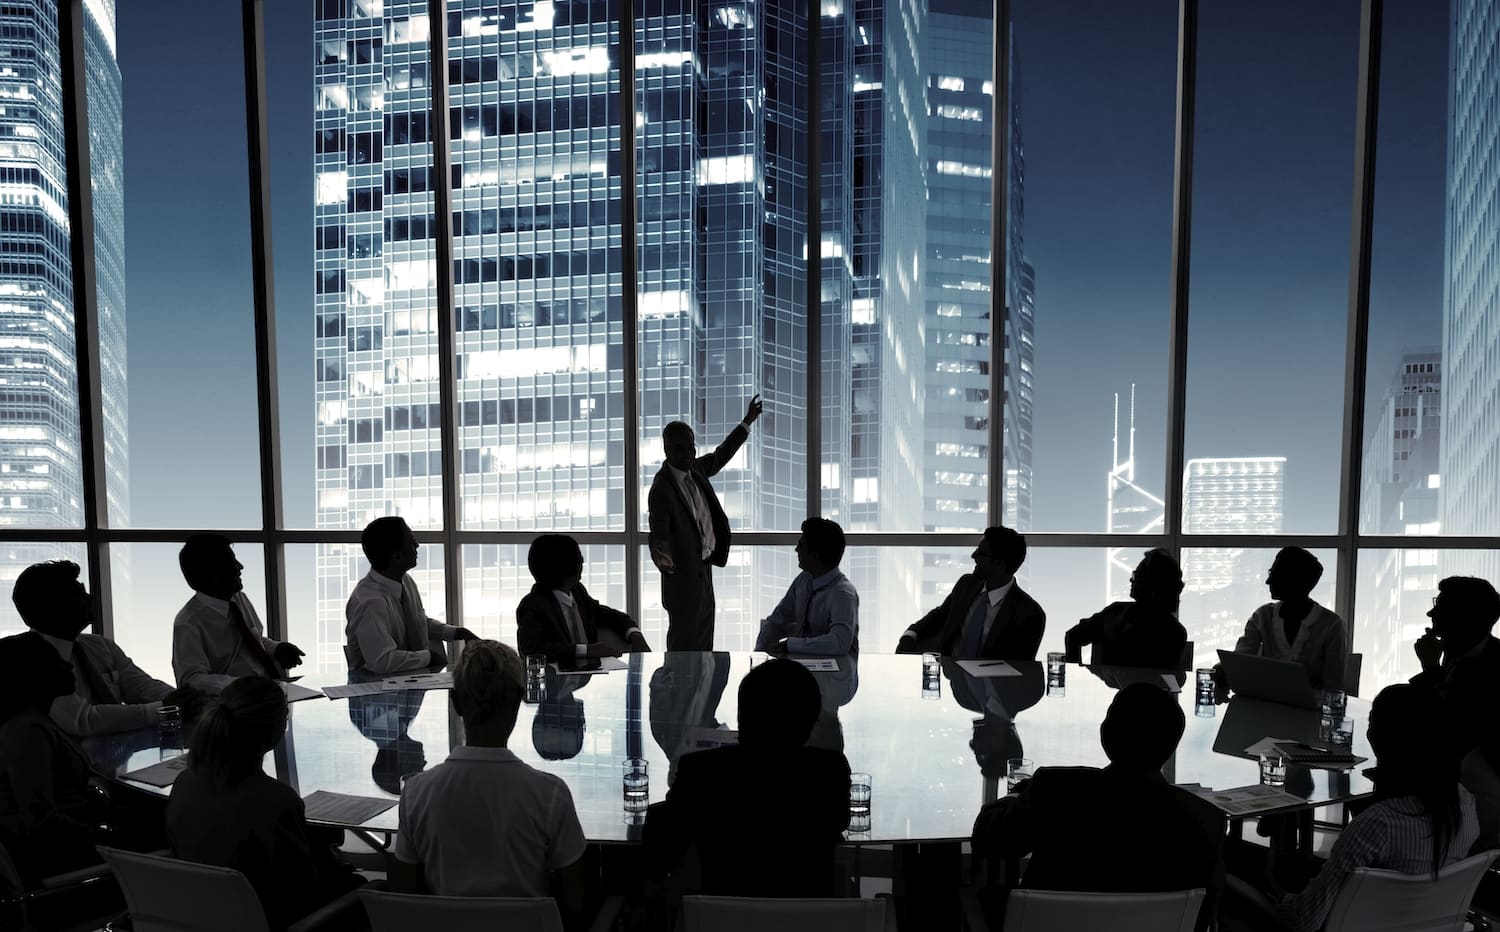 Silhouette of business people in a boardroom meeting. Image from rawpixel.com